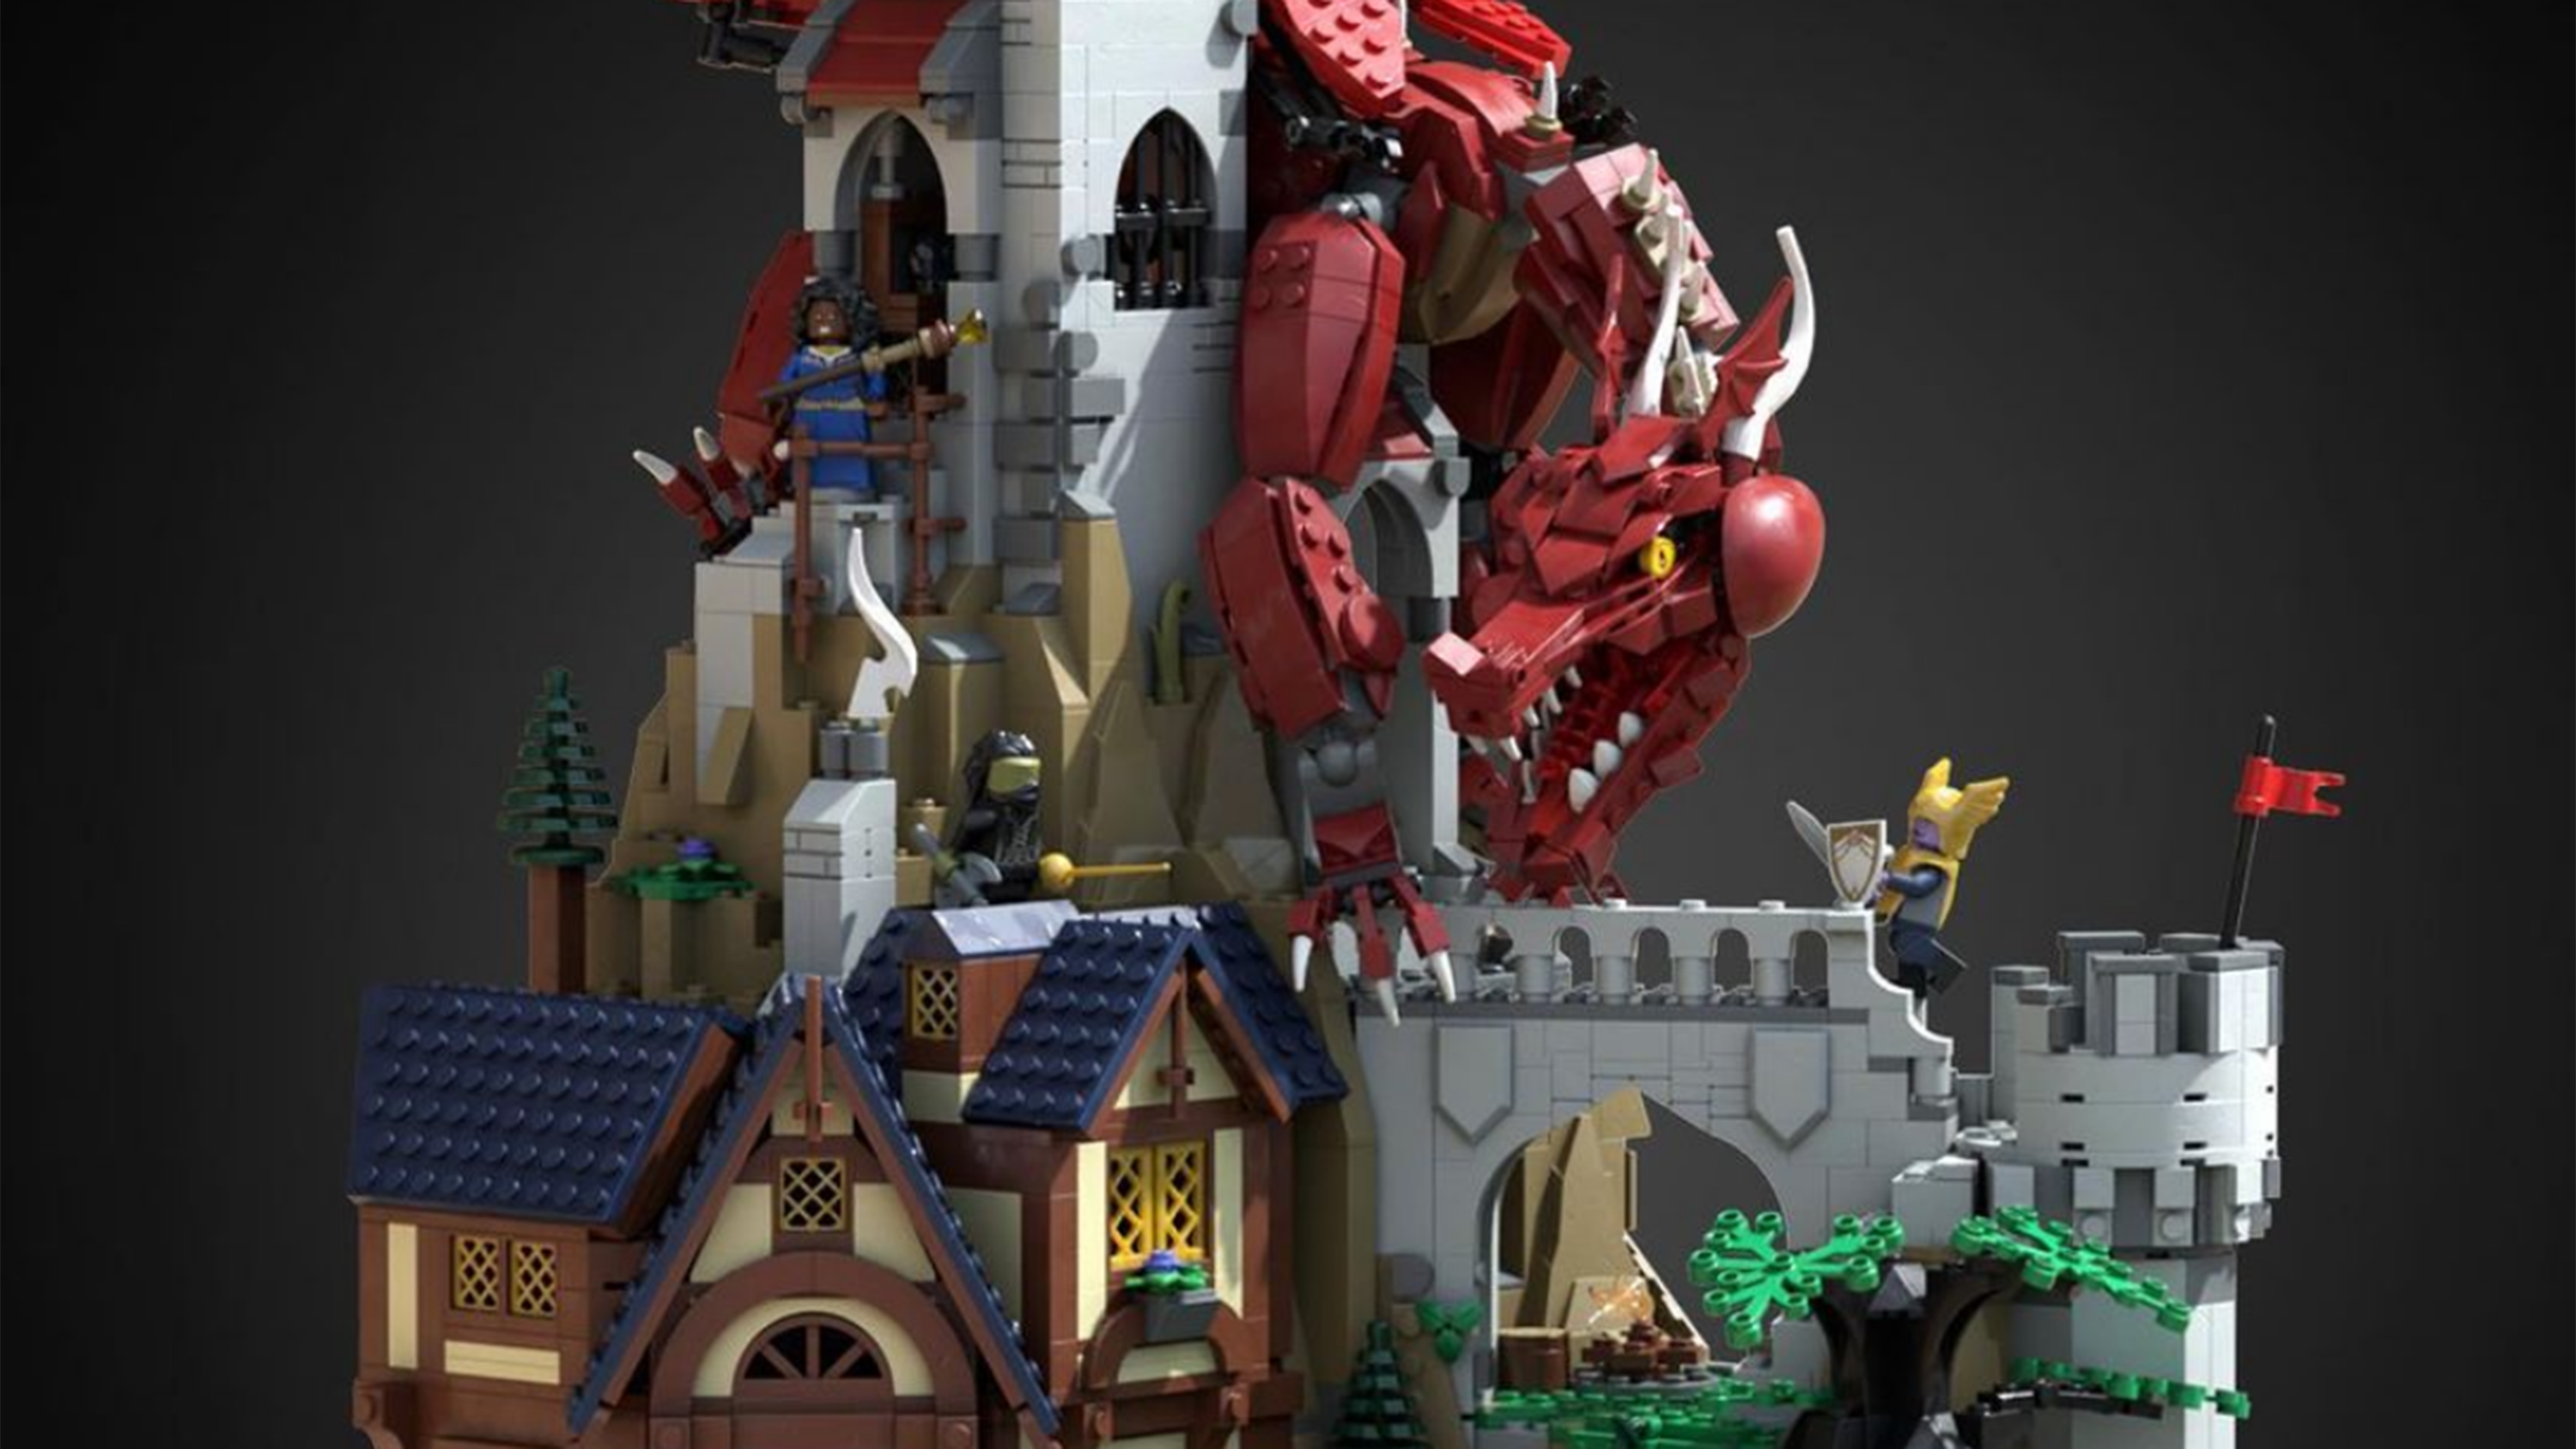 A red dragon winds its way down a tower in the winning design for the 50th anniversary D&amp;D Lego set.